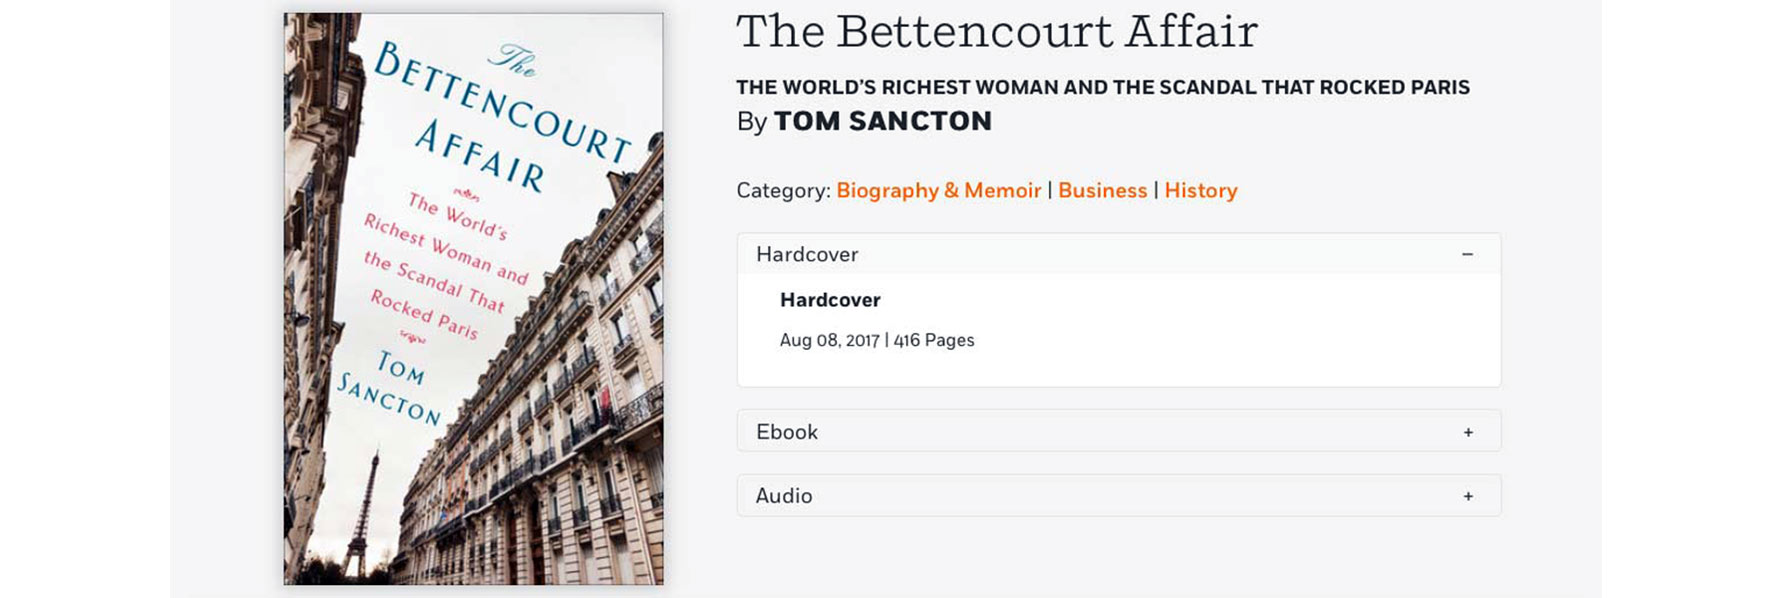 Penguin Random House catalog page for The Bettencourt Affair by Tom Sancton showing book cover and version options